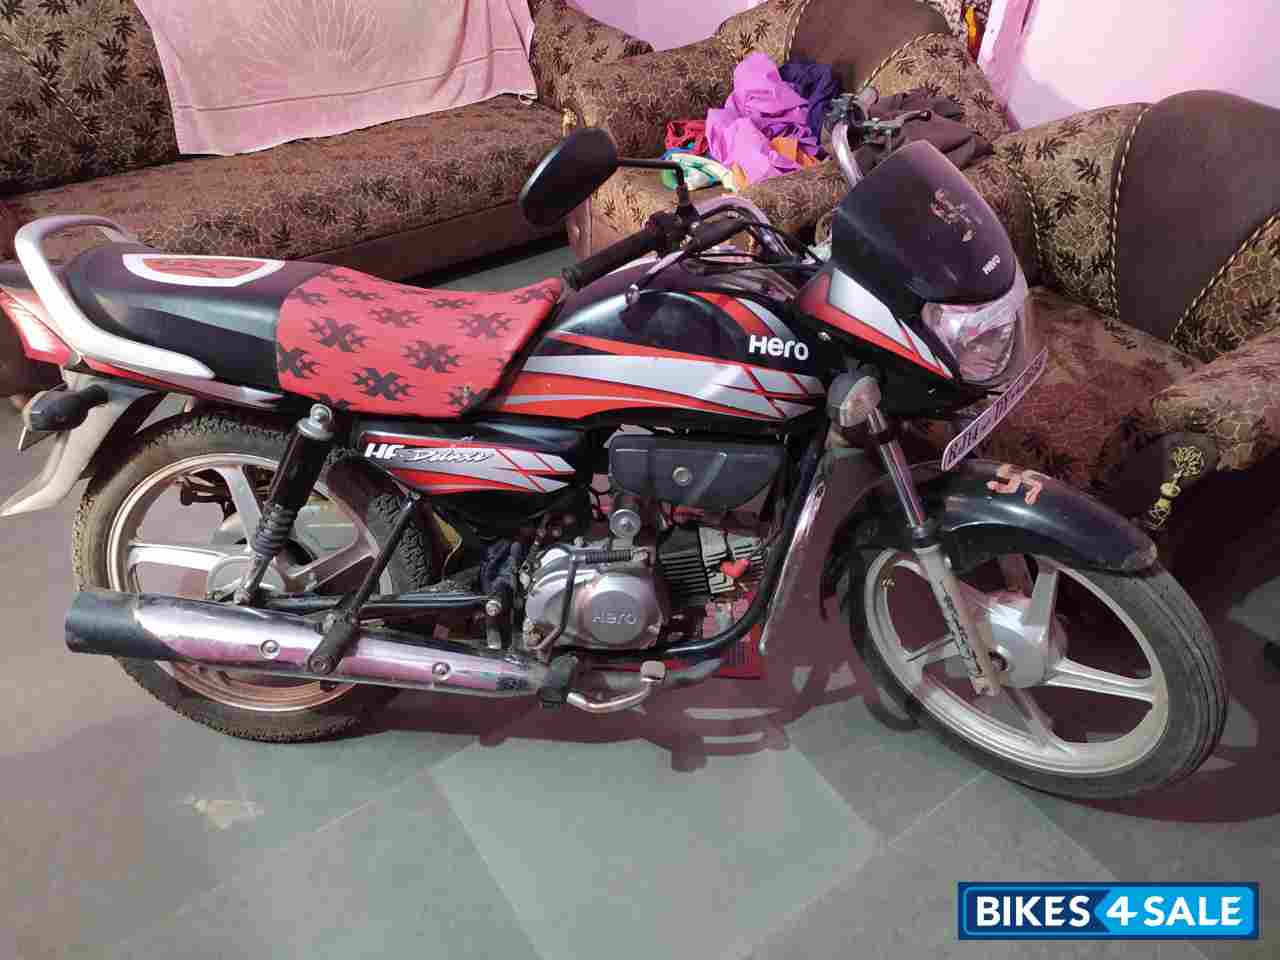 Used 2015 model Hero HF Deluxe for sale in Dausa. ID 286823. Red Black  colour - Bikes4Sale